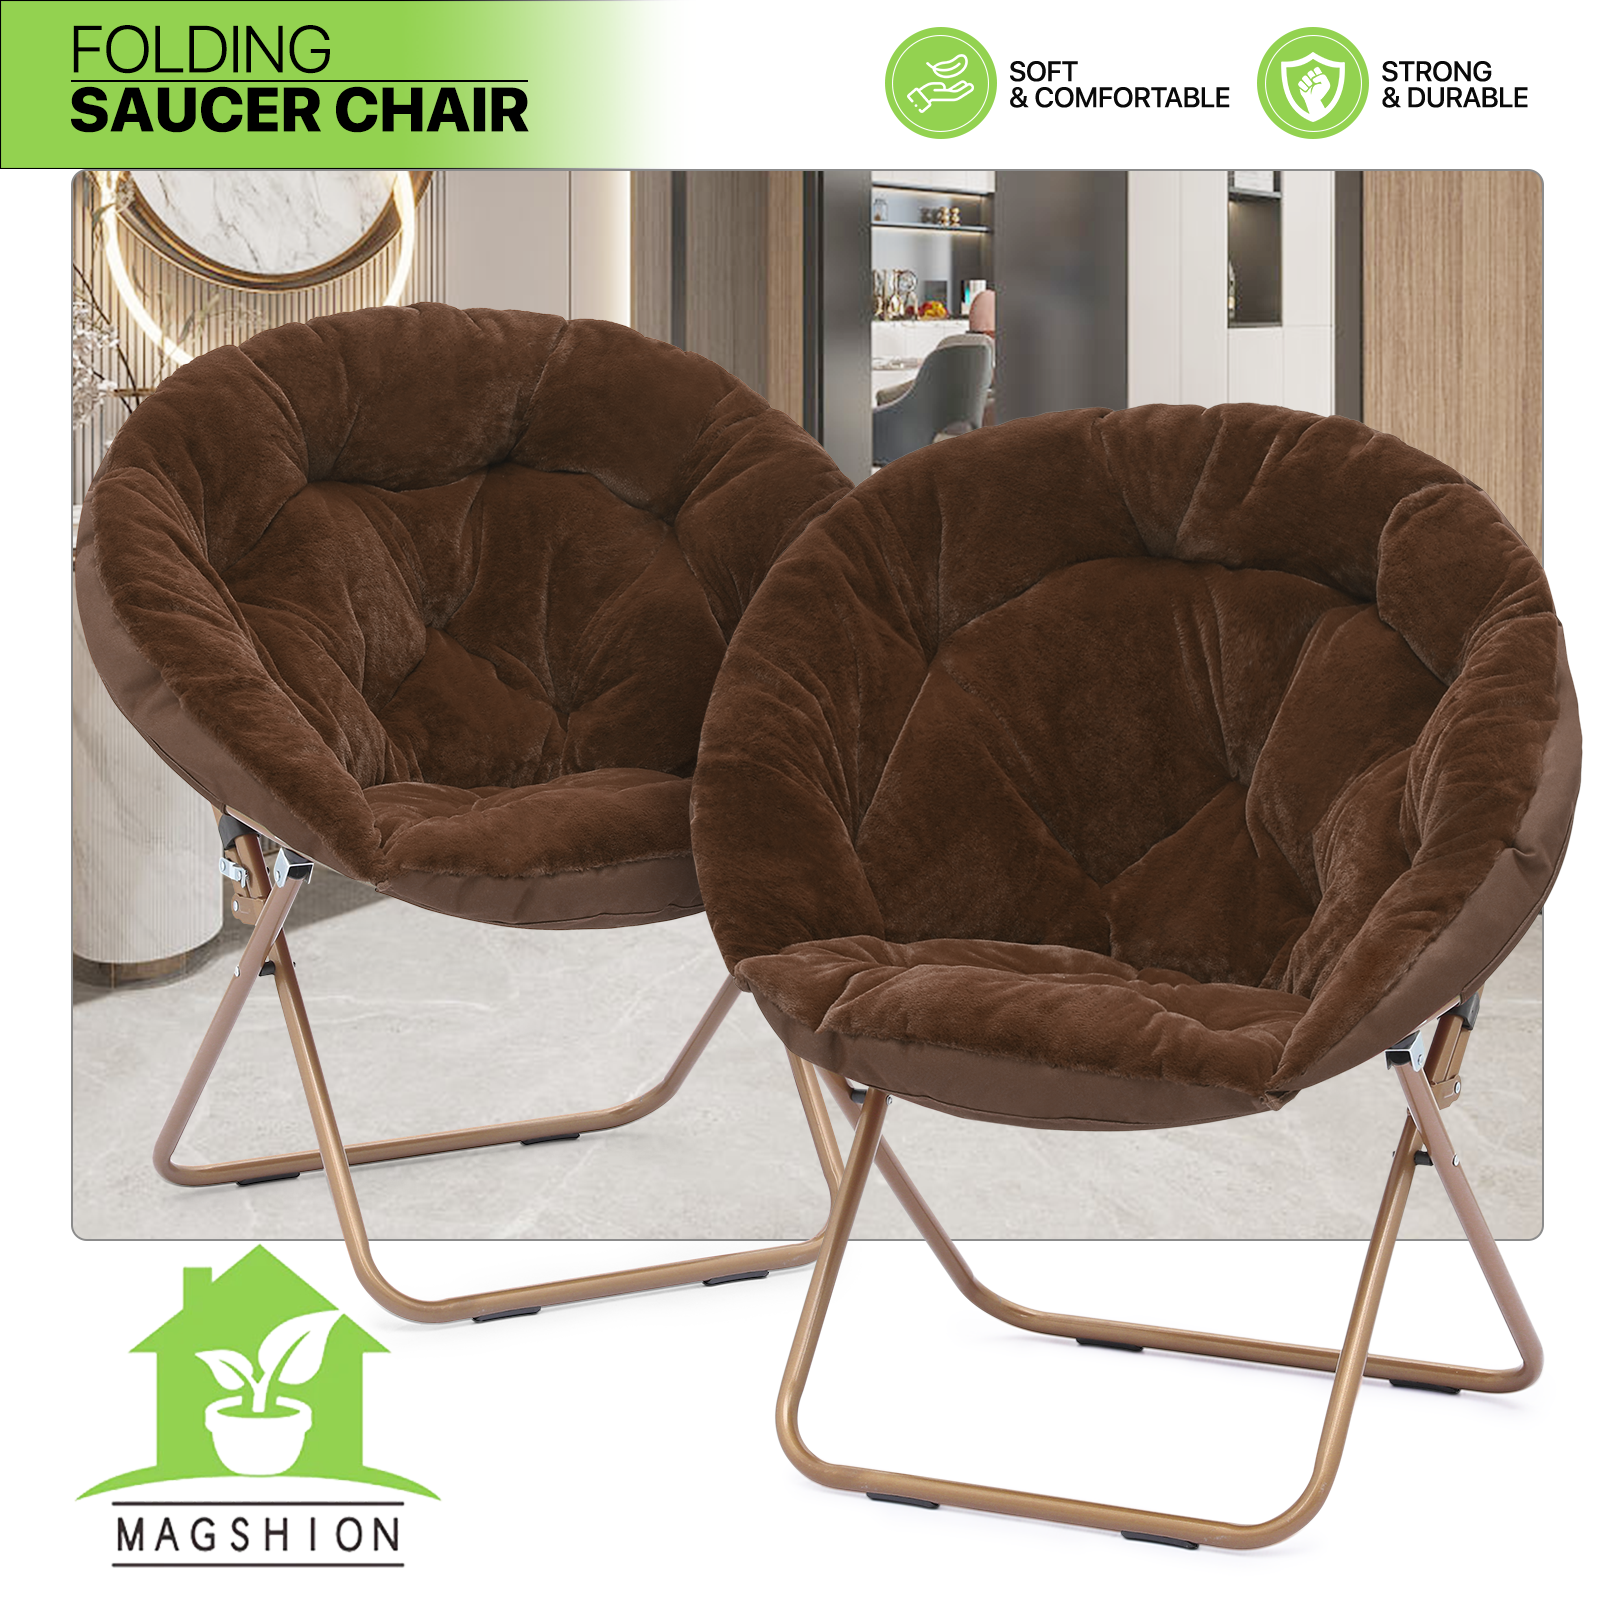 Magshion 2-Piece Folding Lounge Chair Comfy Faux Fur Saucer Chair, Cozy Moon Chair Seating with Metal Frame for Home Living Room Bedroom, Brown - image 2 of 10